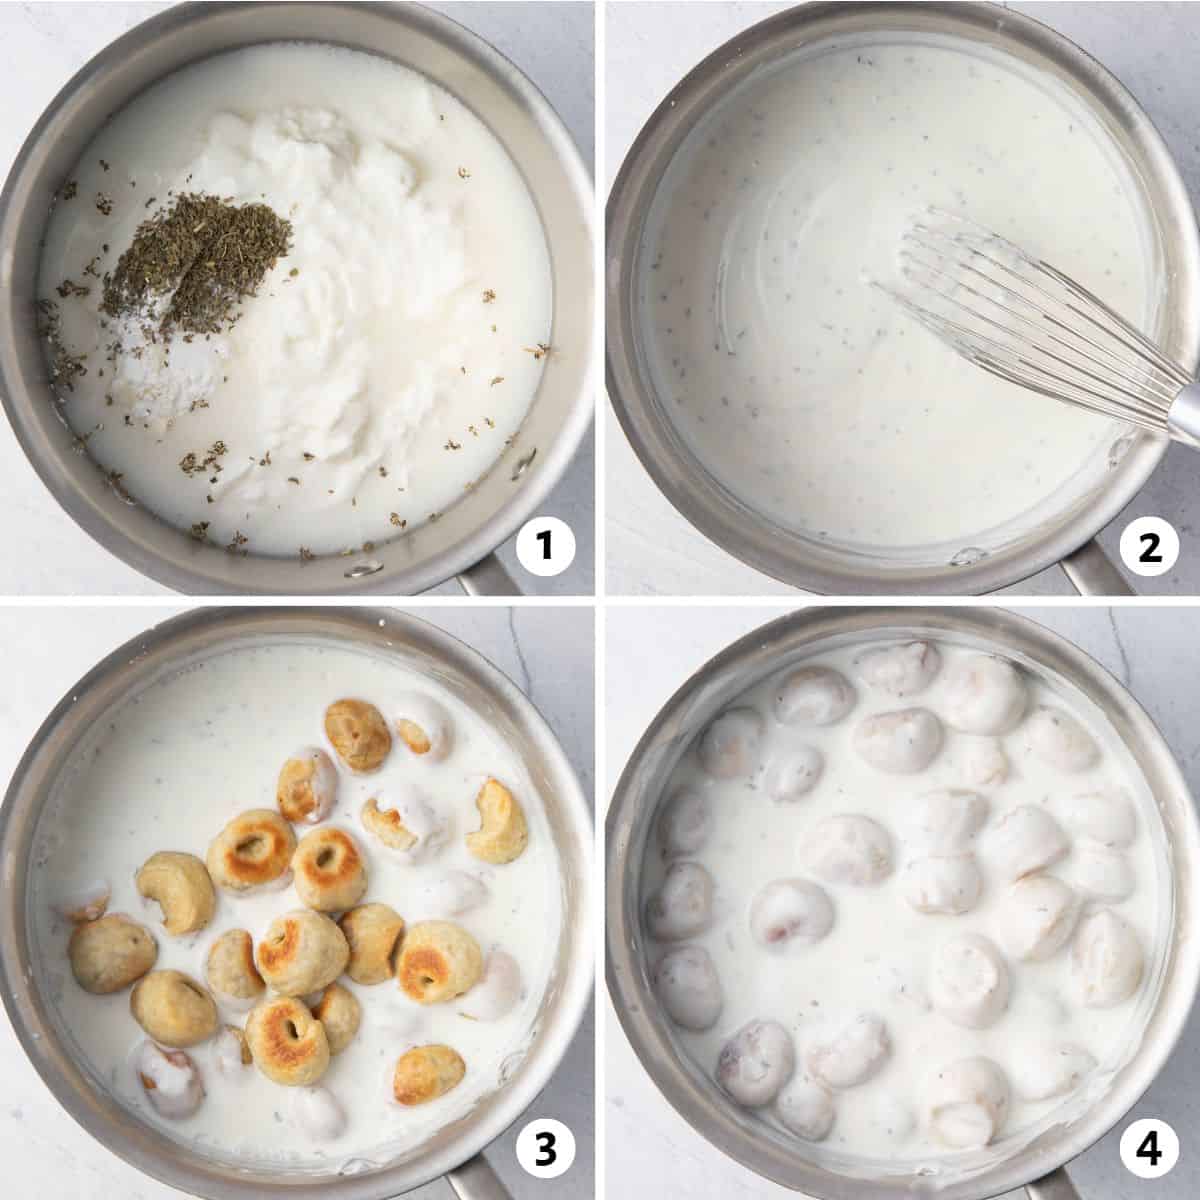 4 image collage making final part of recipe: yogurt sauce ingredients added to a pot before combing, 2- sauce being whisked together, 3- baked dumplings added to sauce, 4- dumpling tossed into sauce.